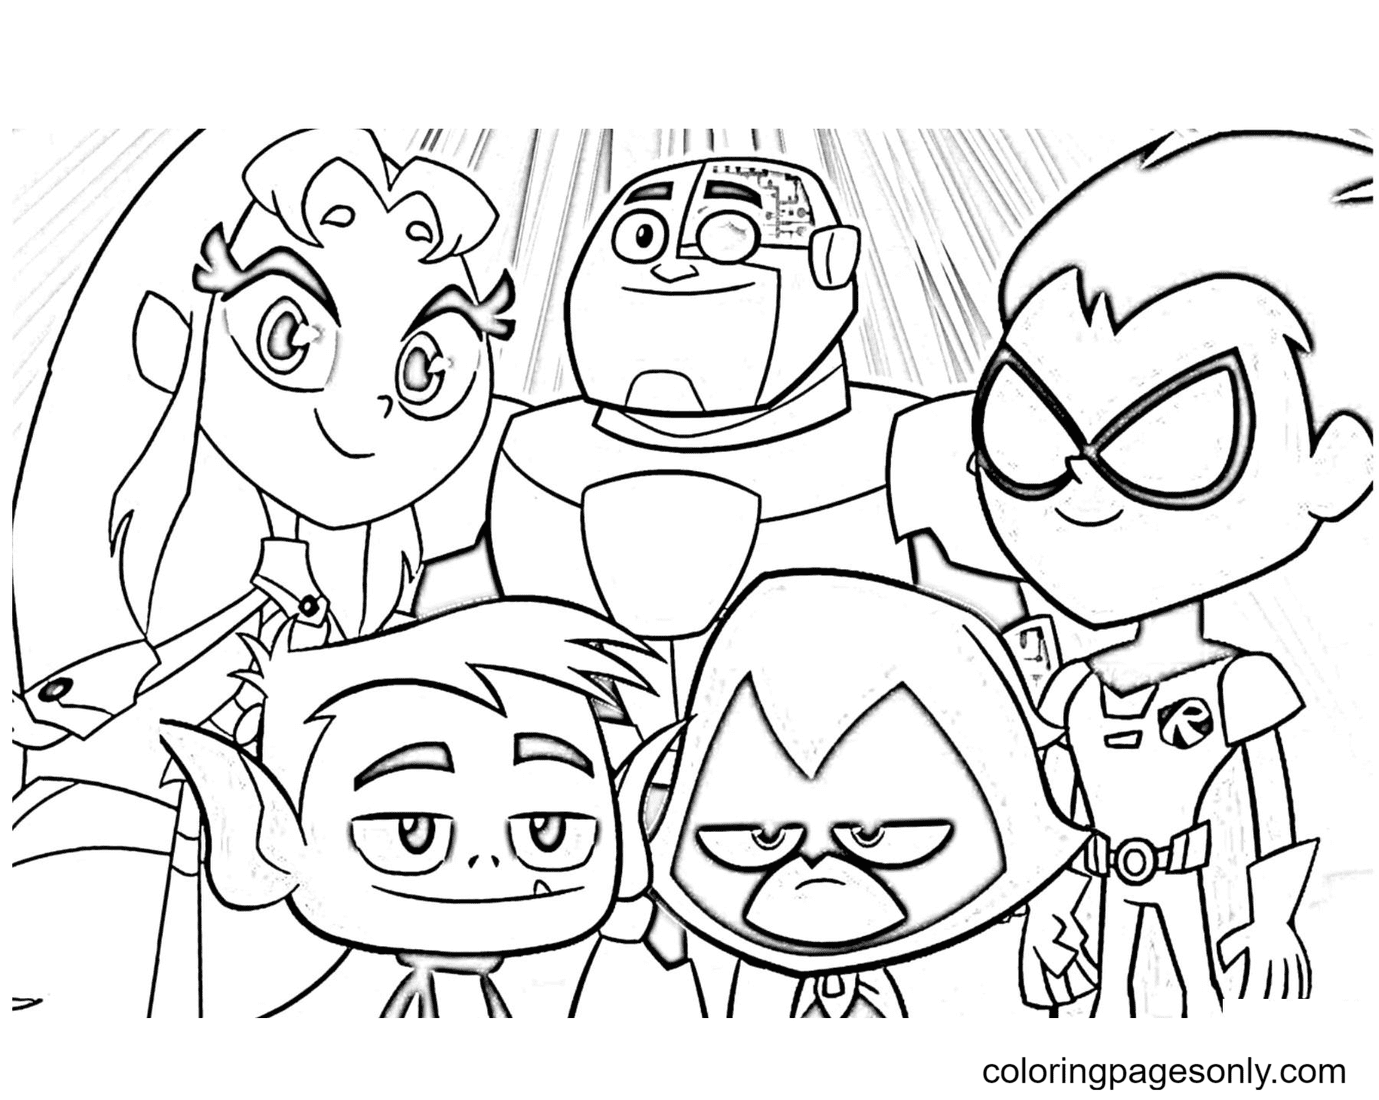 Teen Titans Go all characters Coloring Page